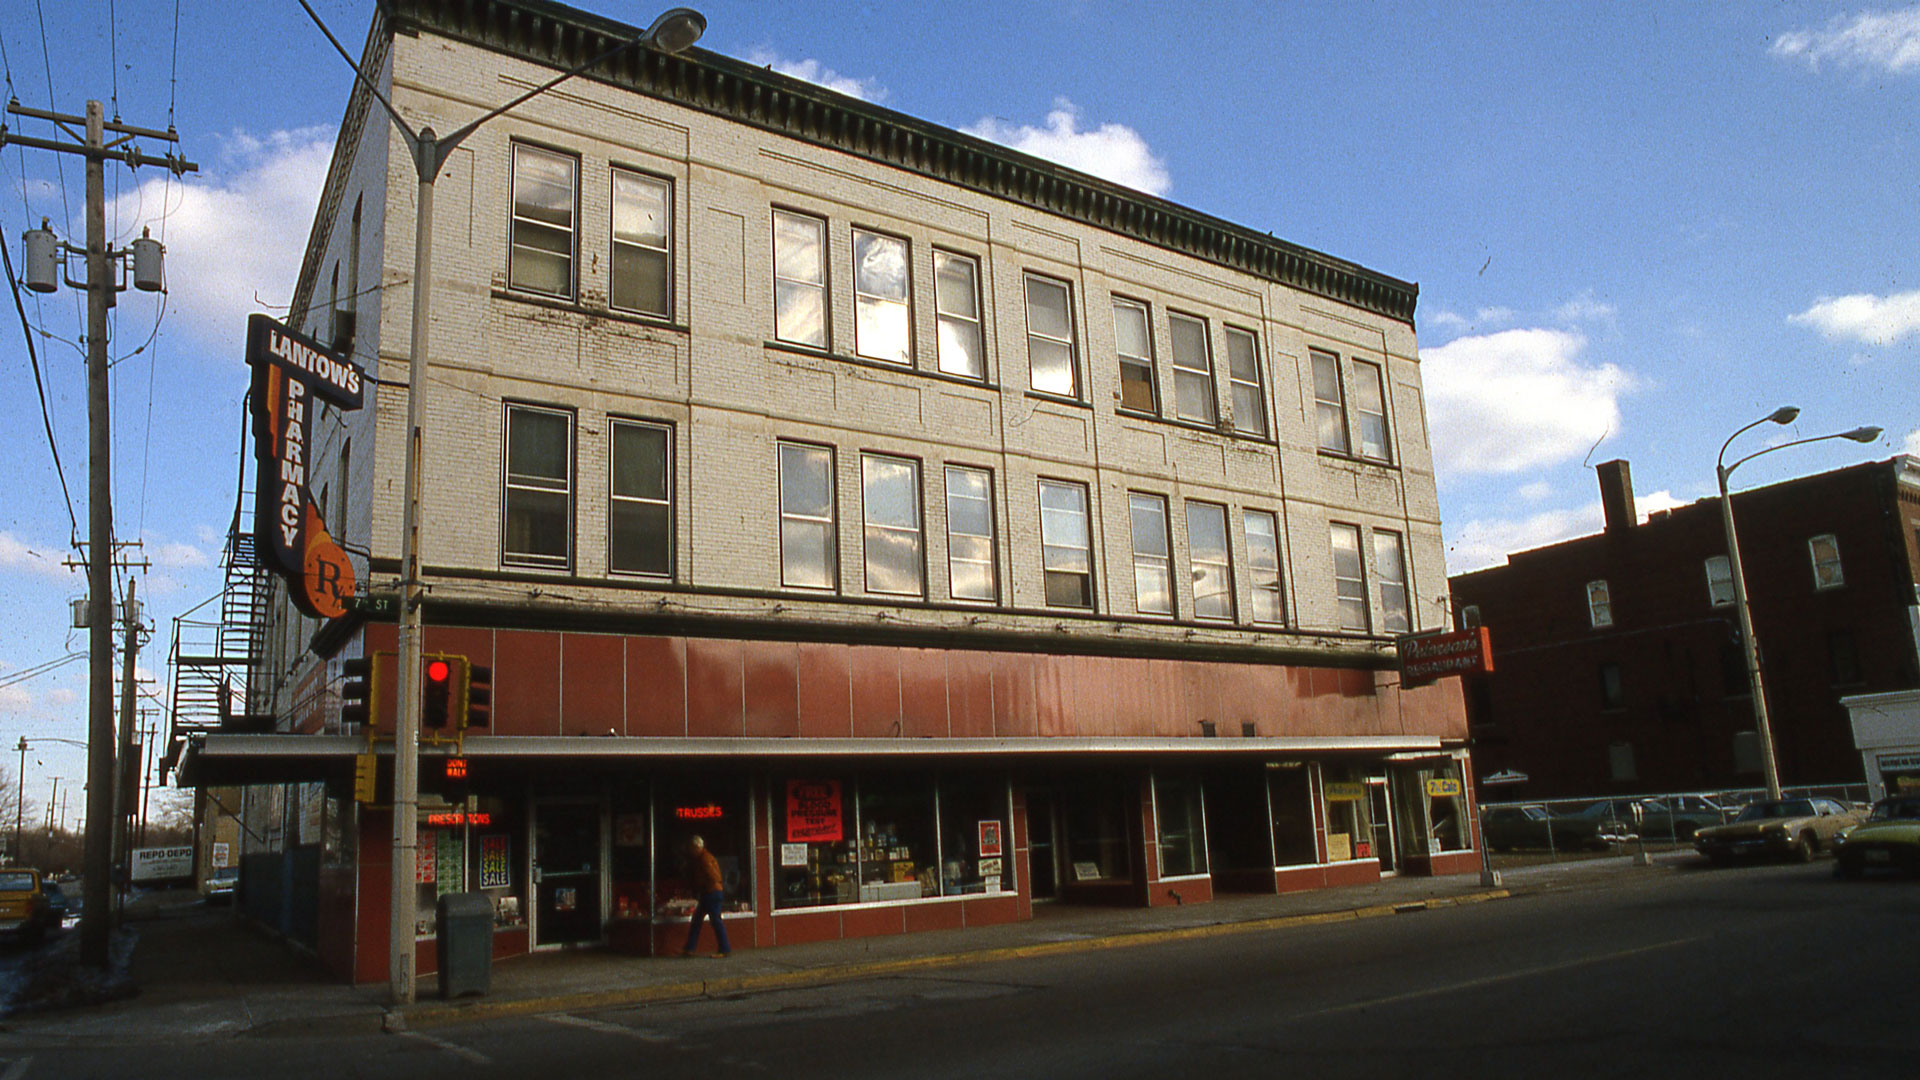 Exterior image of the former Lantow Pharmacy, now known as Katie's Cup and Lantow Lofts in Rockford's Midtown neighborhood.